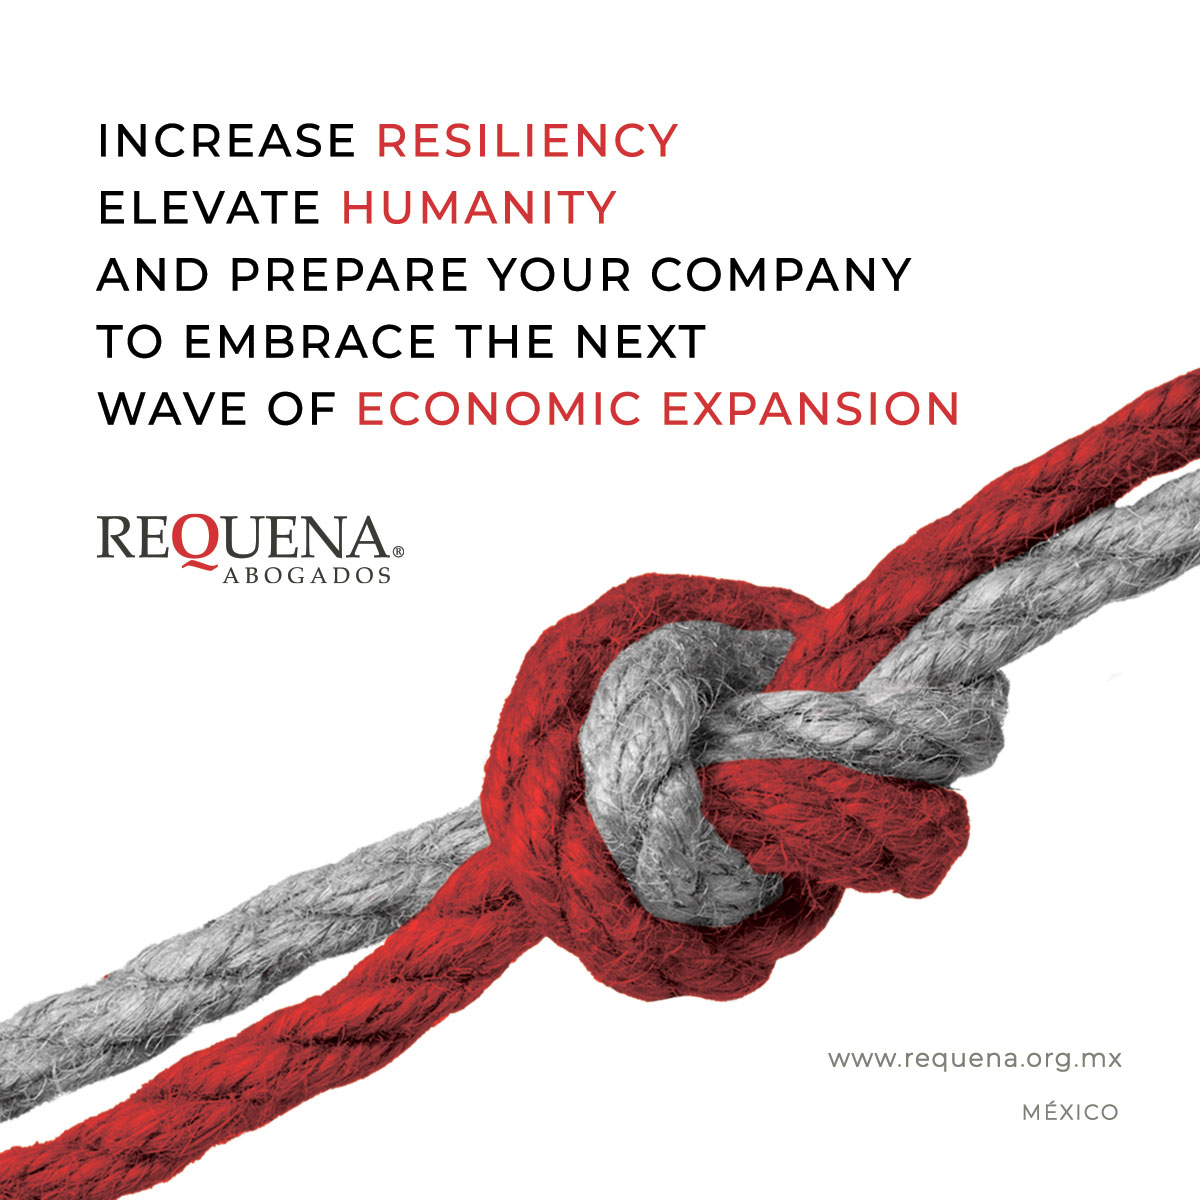 Increase resiliency elevate humanity and prepare your company to embrace the next wave of economic expansion | Covid-19 | Requena Abogados